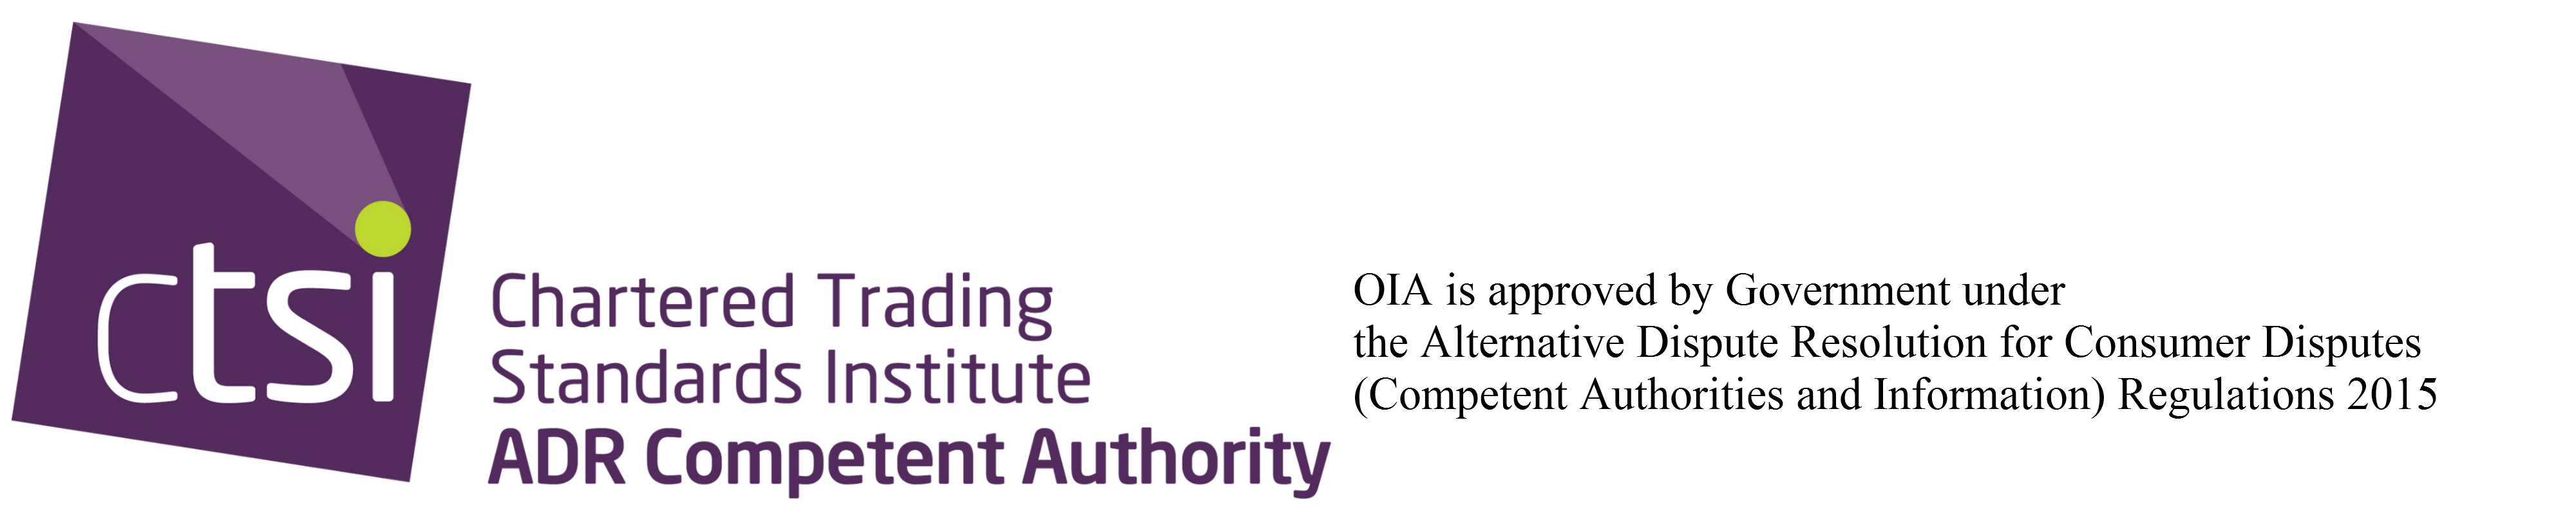 The OIA is approved under the ADR for Consumer Disputes Regulations 2015